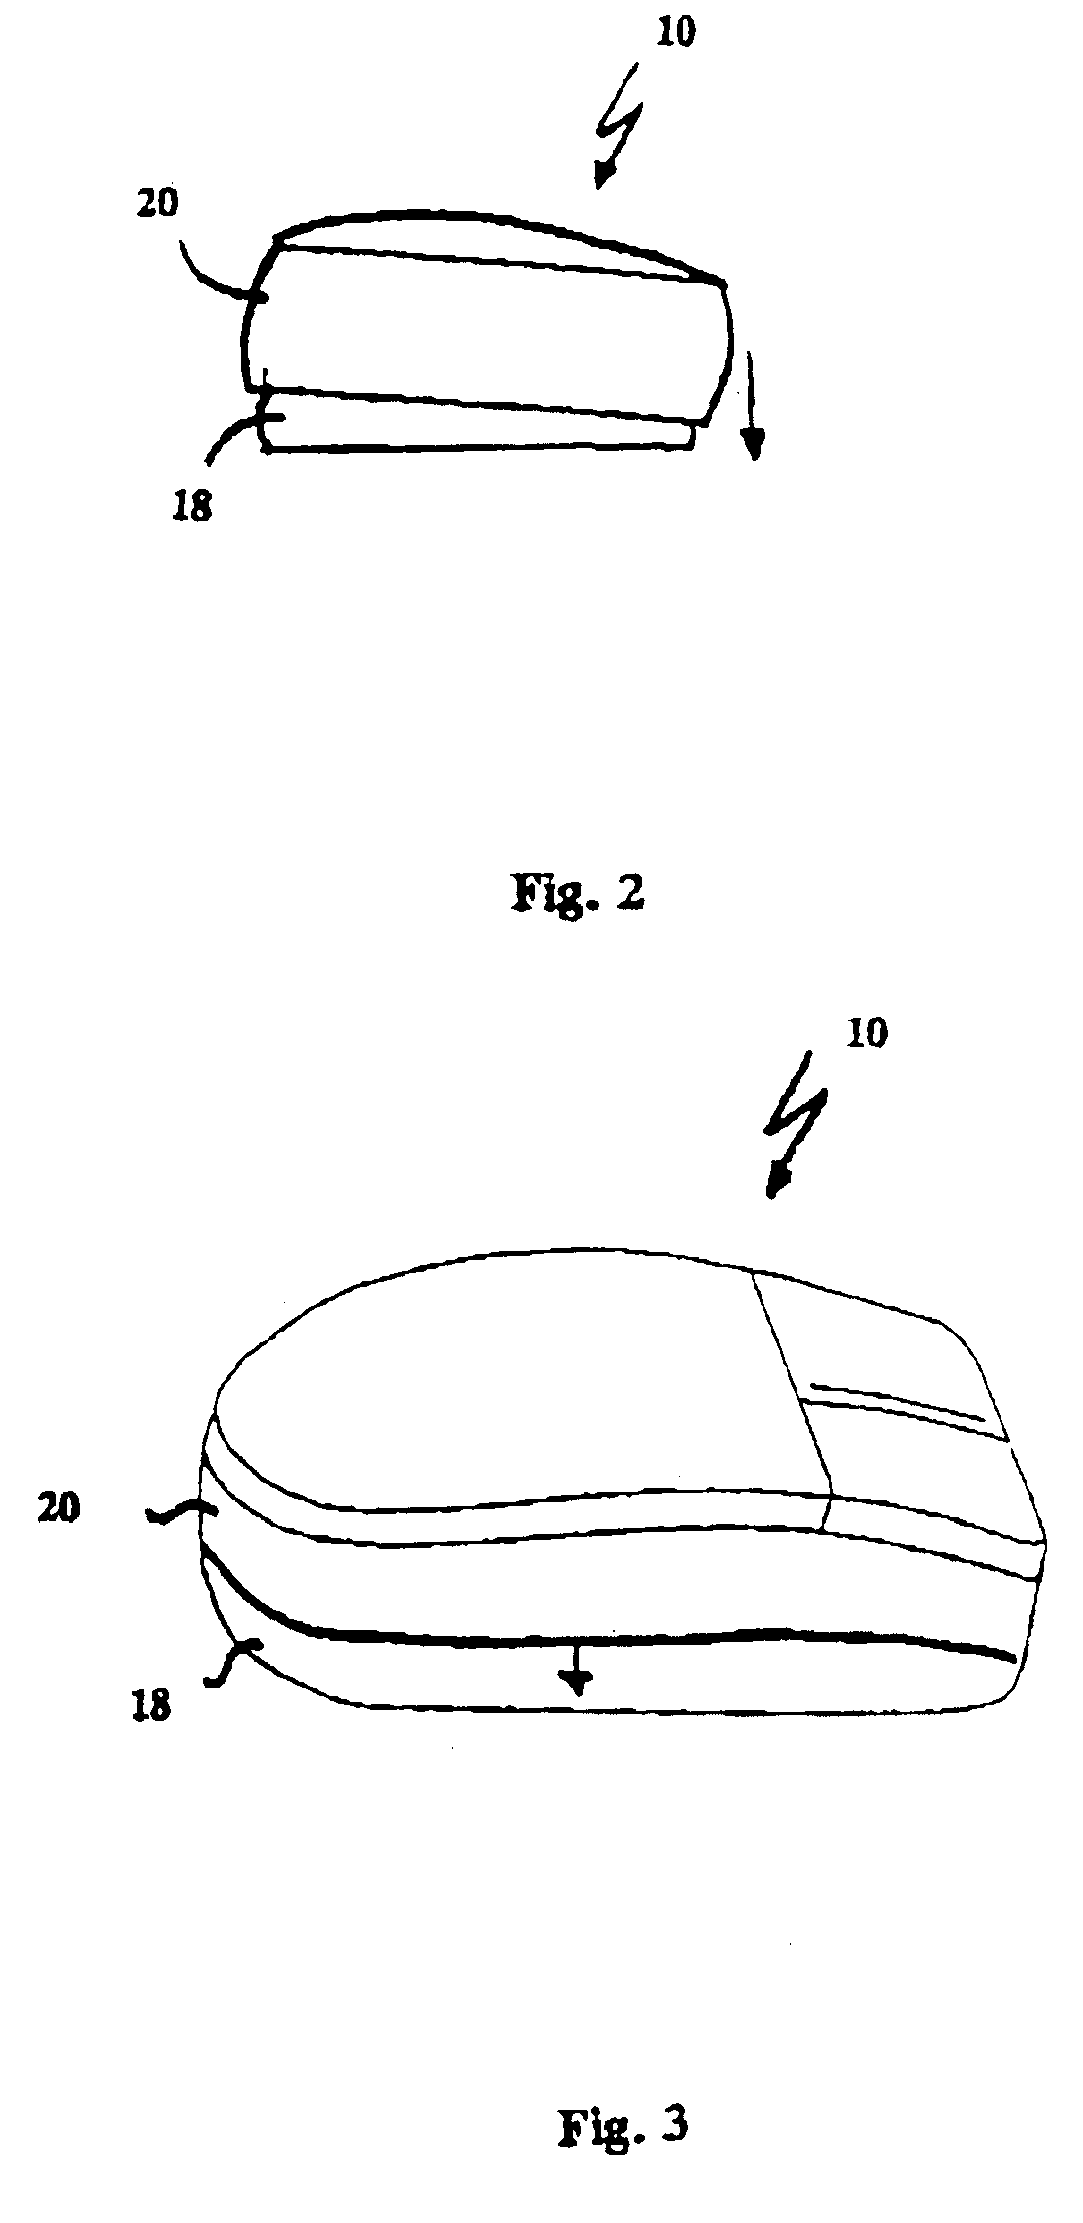 Mouse device with tactile feedback applied to housing